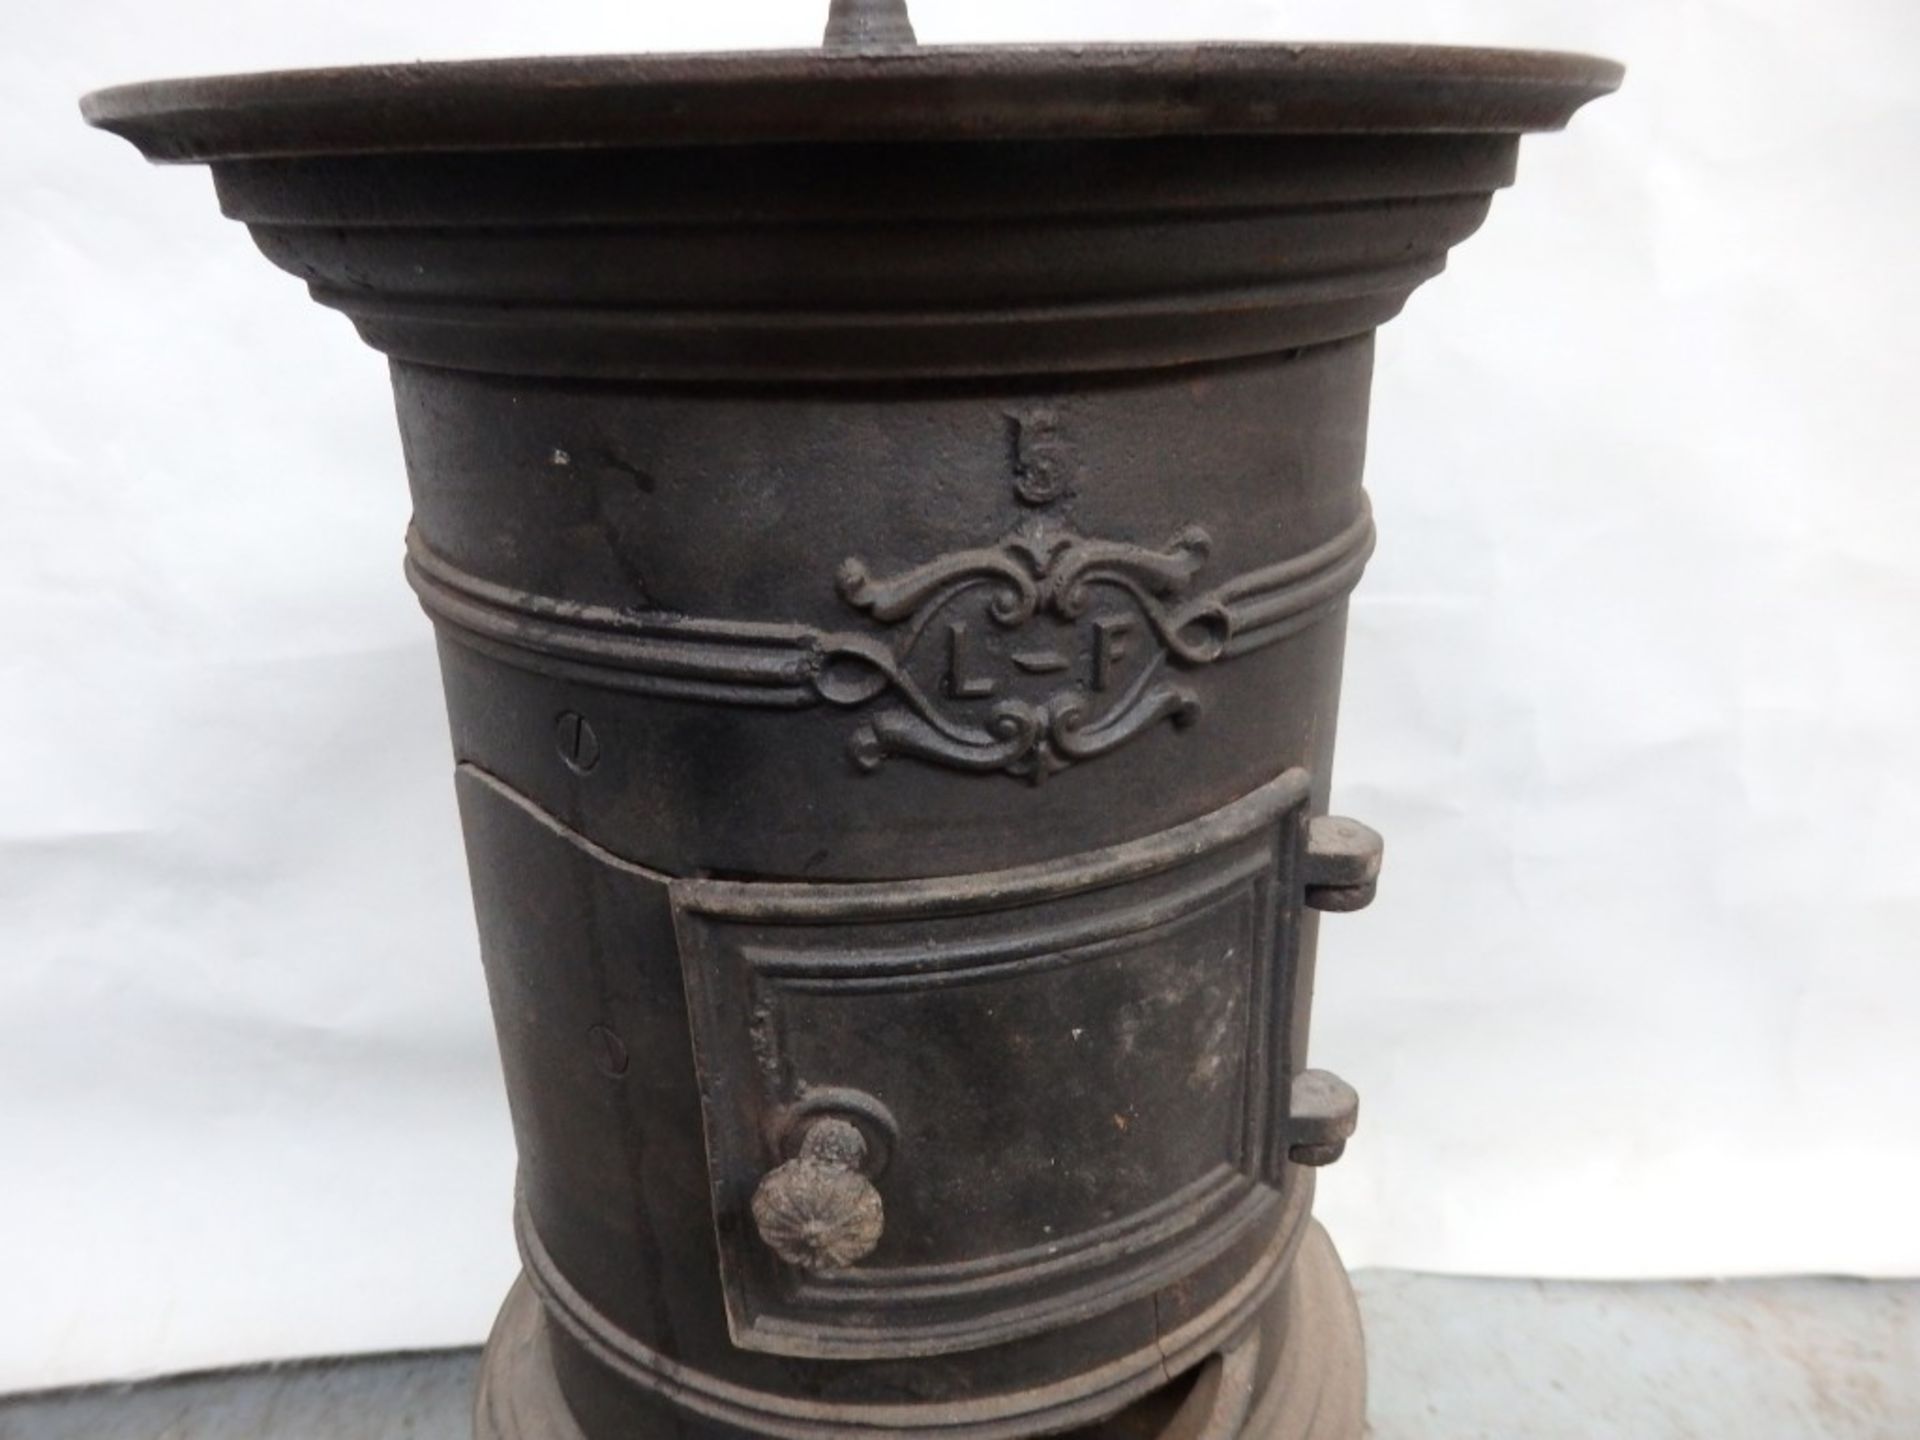 1 x Reclaimed Antique Cast Iron Potbelly Wood Burner / Stove - Dimensions: H61, Diameter 30cm - - Image 15 of 18